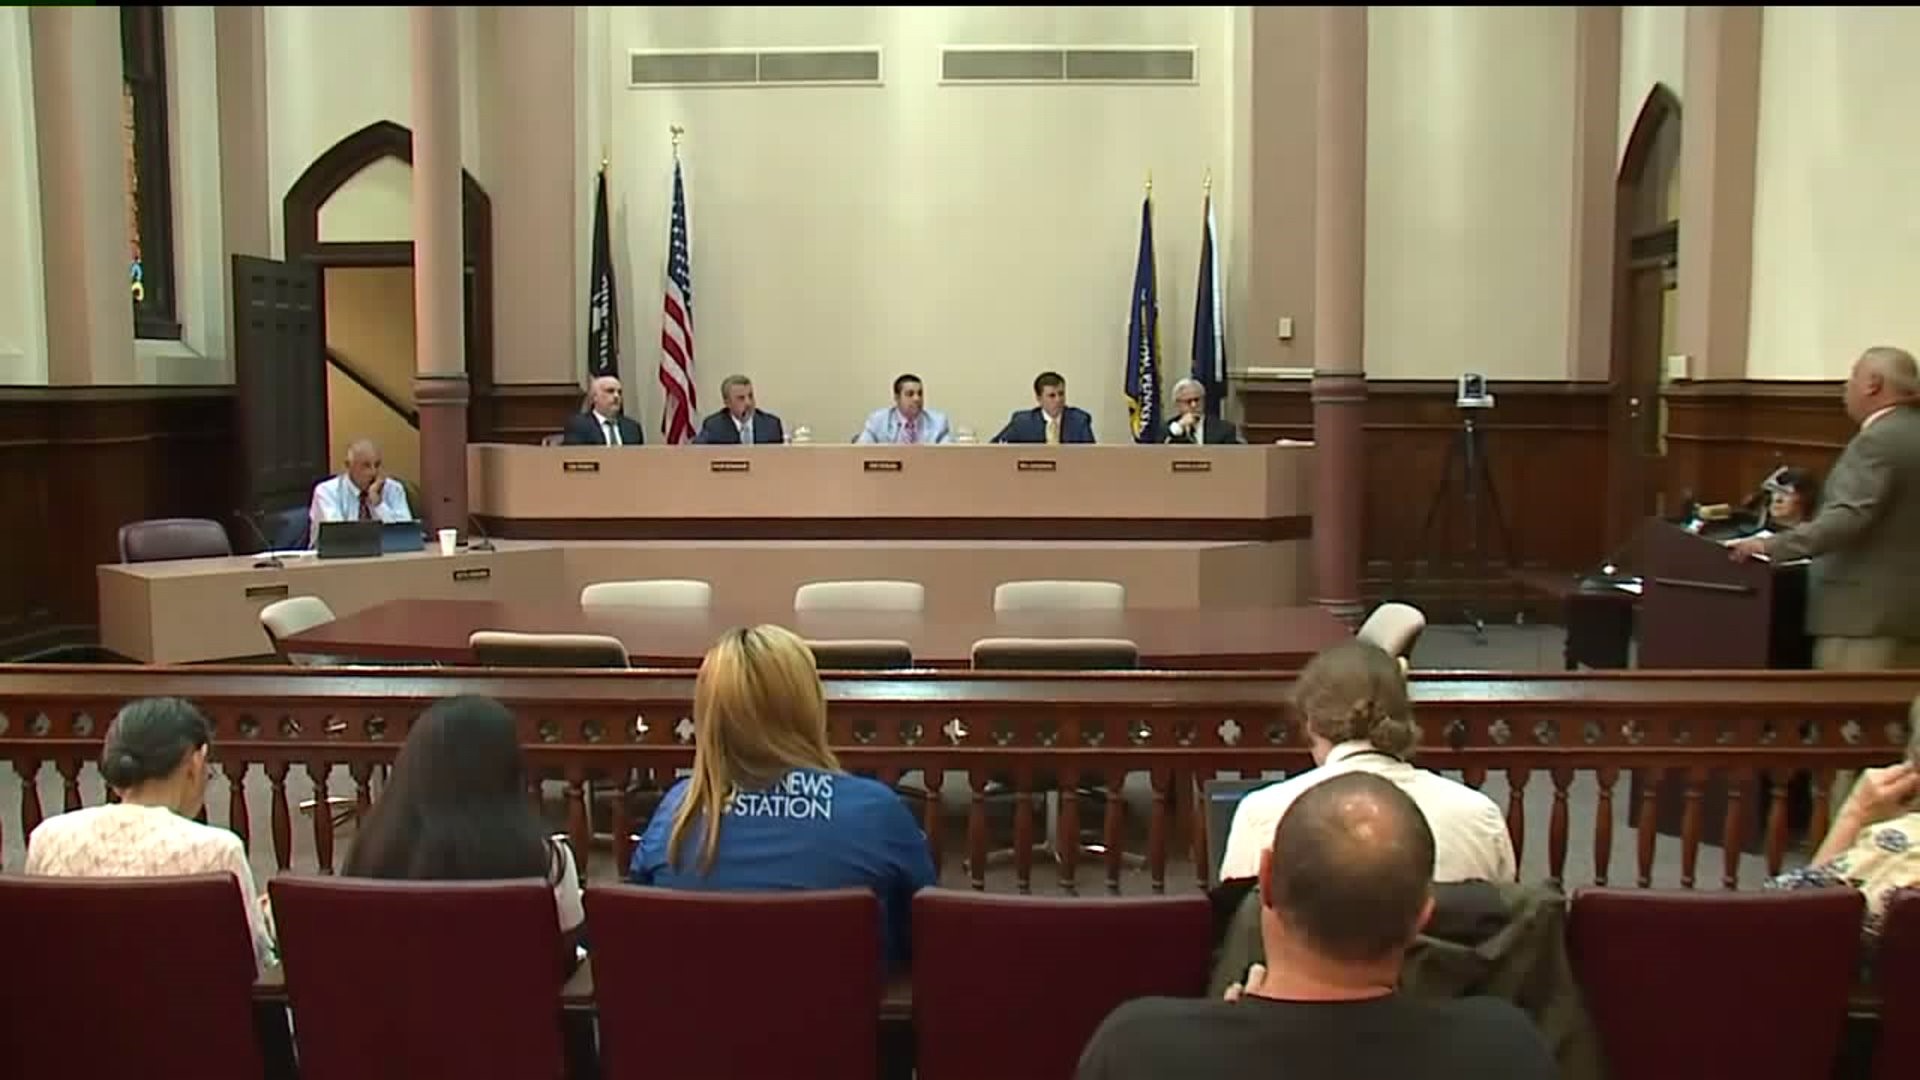 Open Interviews in Scranton for Interim Mayor as New Charges are Announced